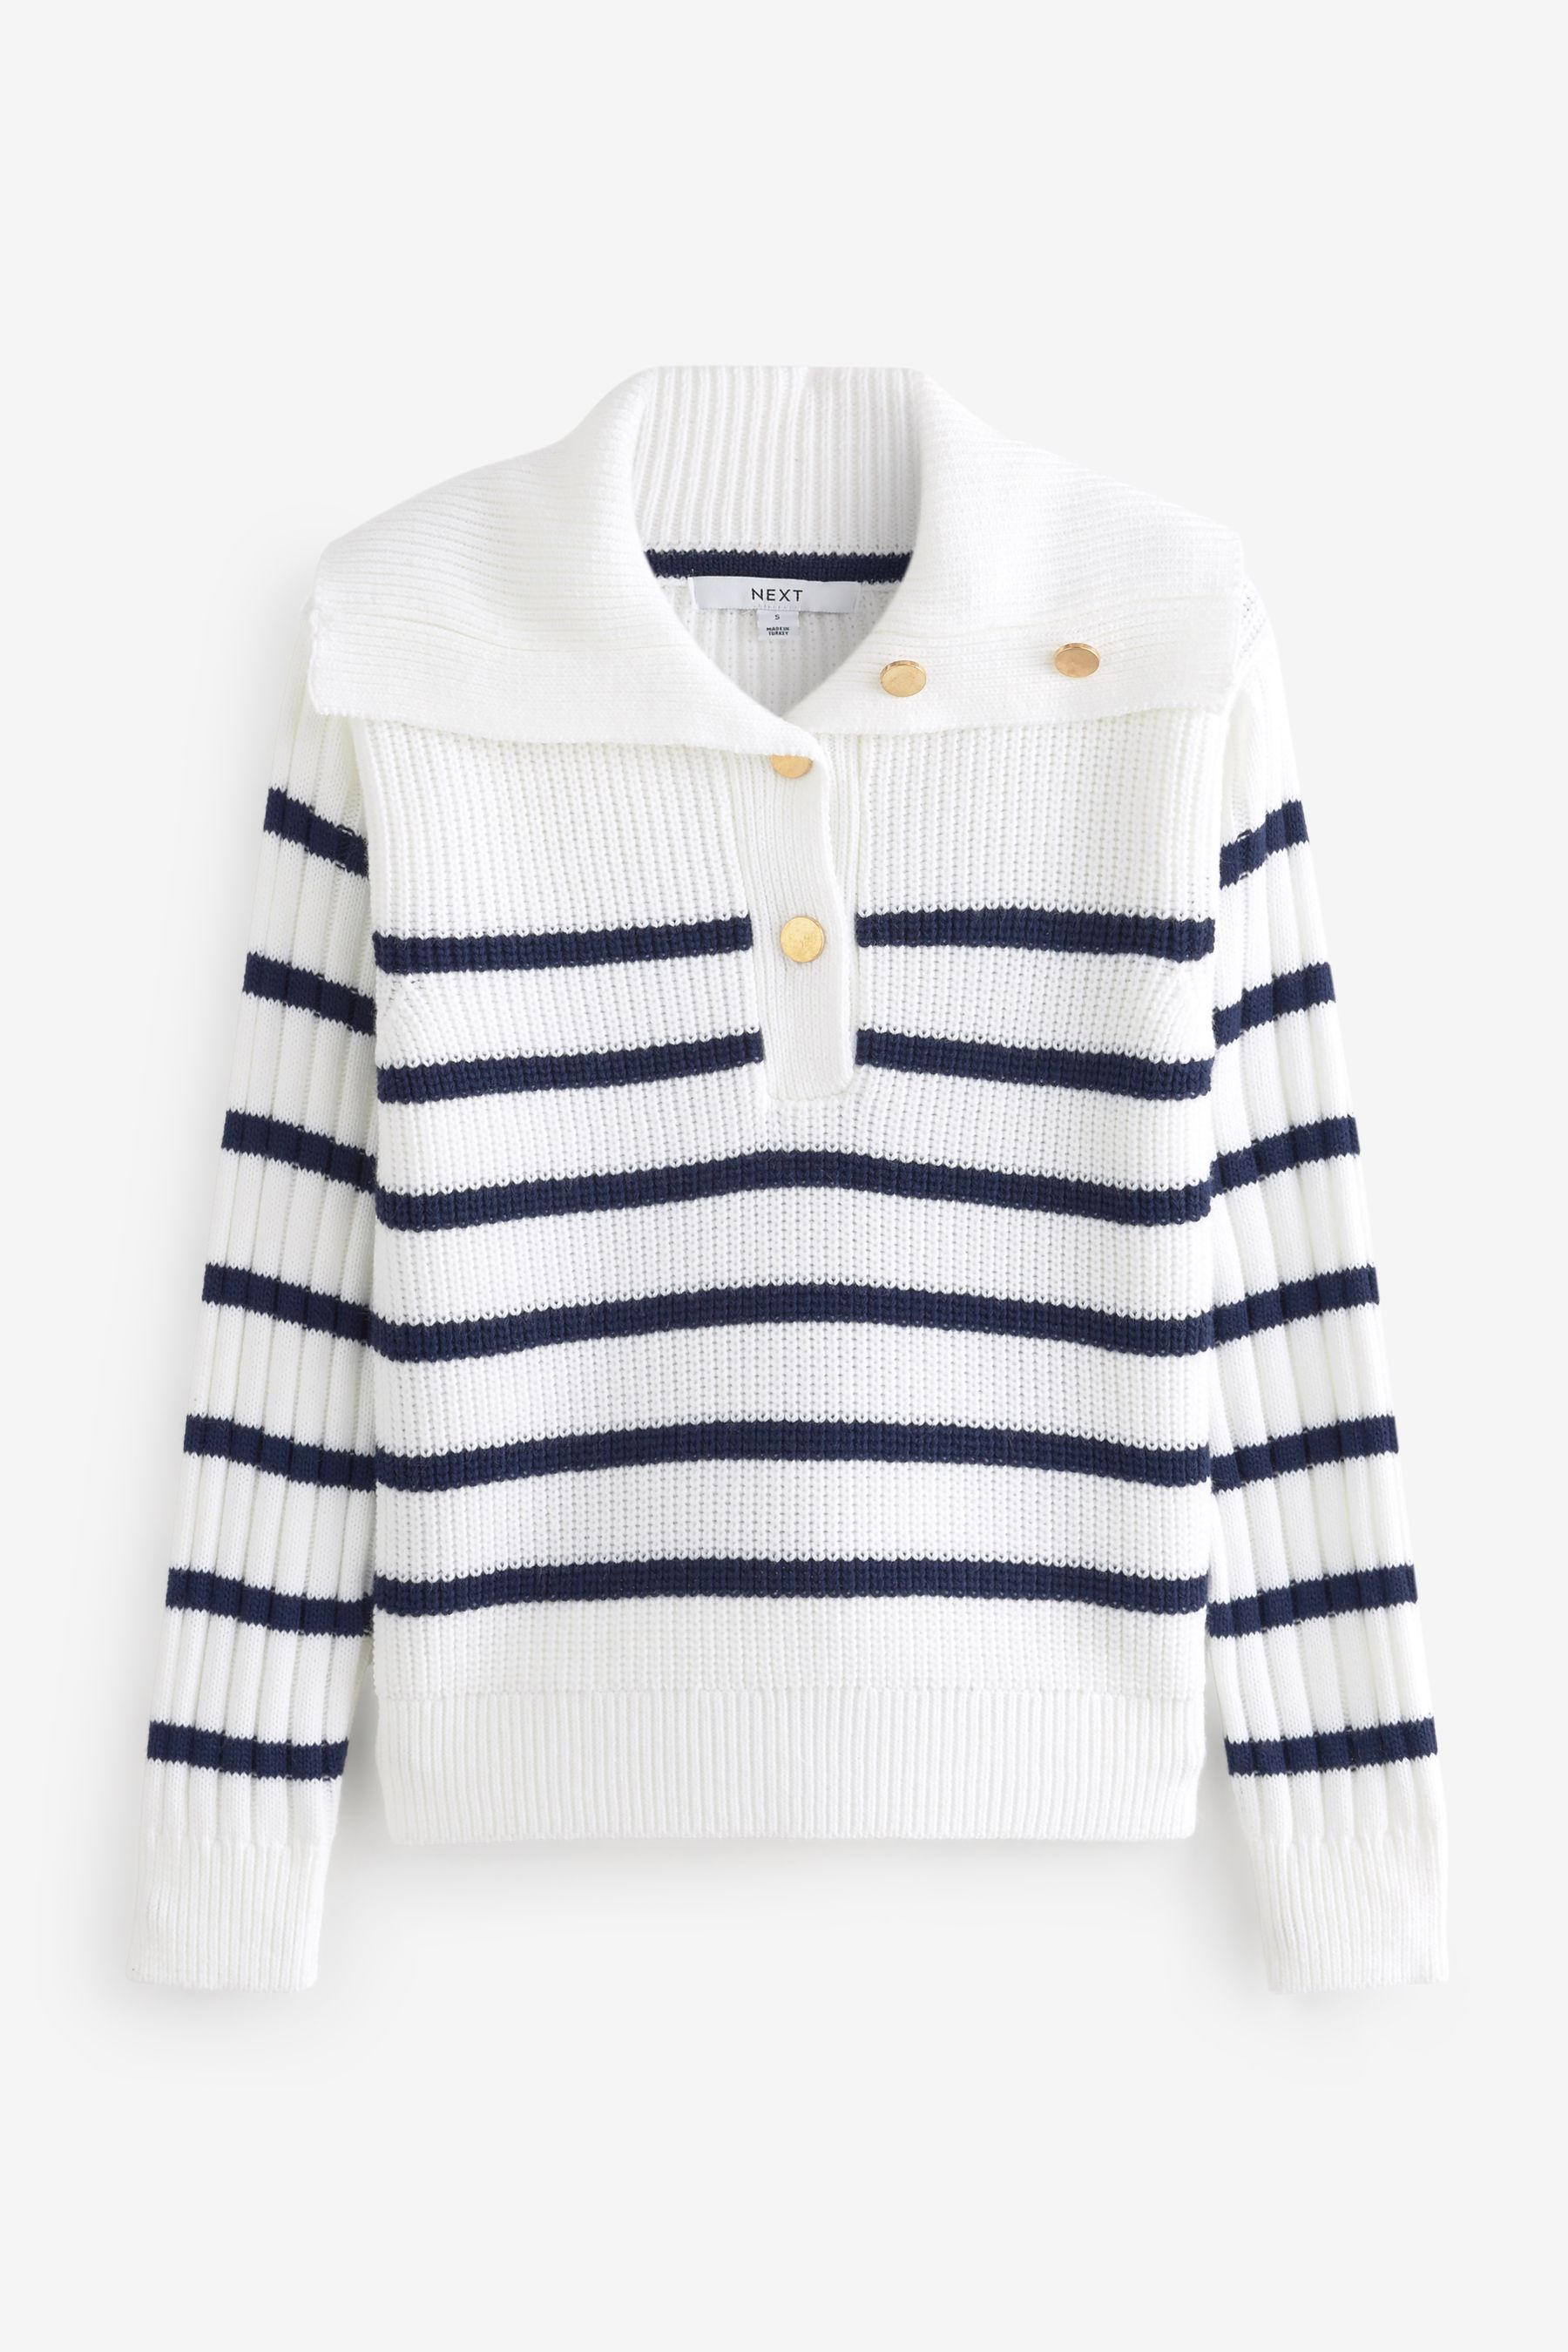 Buy Ecru White/Navy Blue Striped Button Up Fly Collar Jumper from the ...